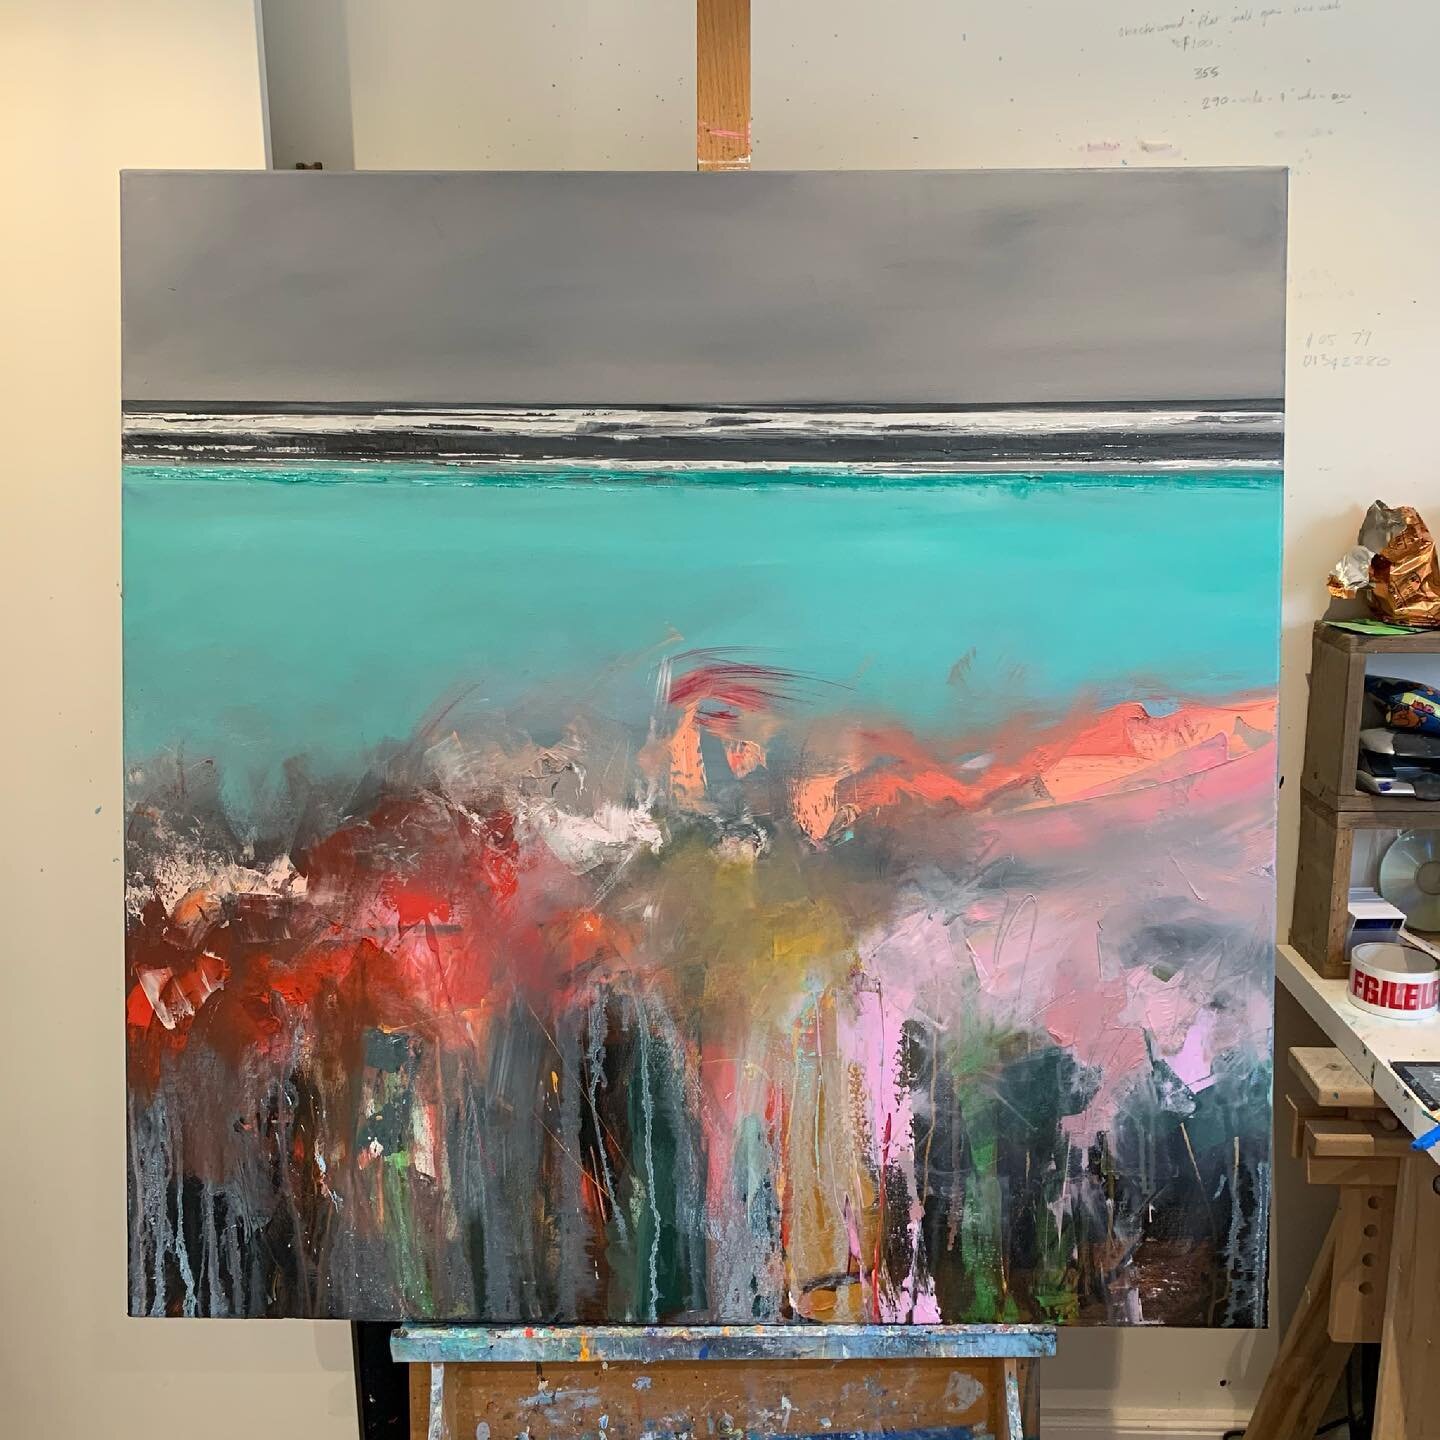 SO HAPPY! I&rsquo;ve fallen in love with this as I have painted it! It&rsquo;s quite different to my usual style. There&rsquo;s a bit more thought(!) and control and I&rsquo;ve used more brush work than the usual palette knife dominating. But I love 